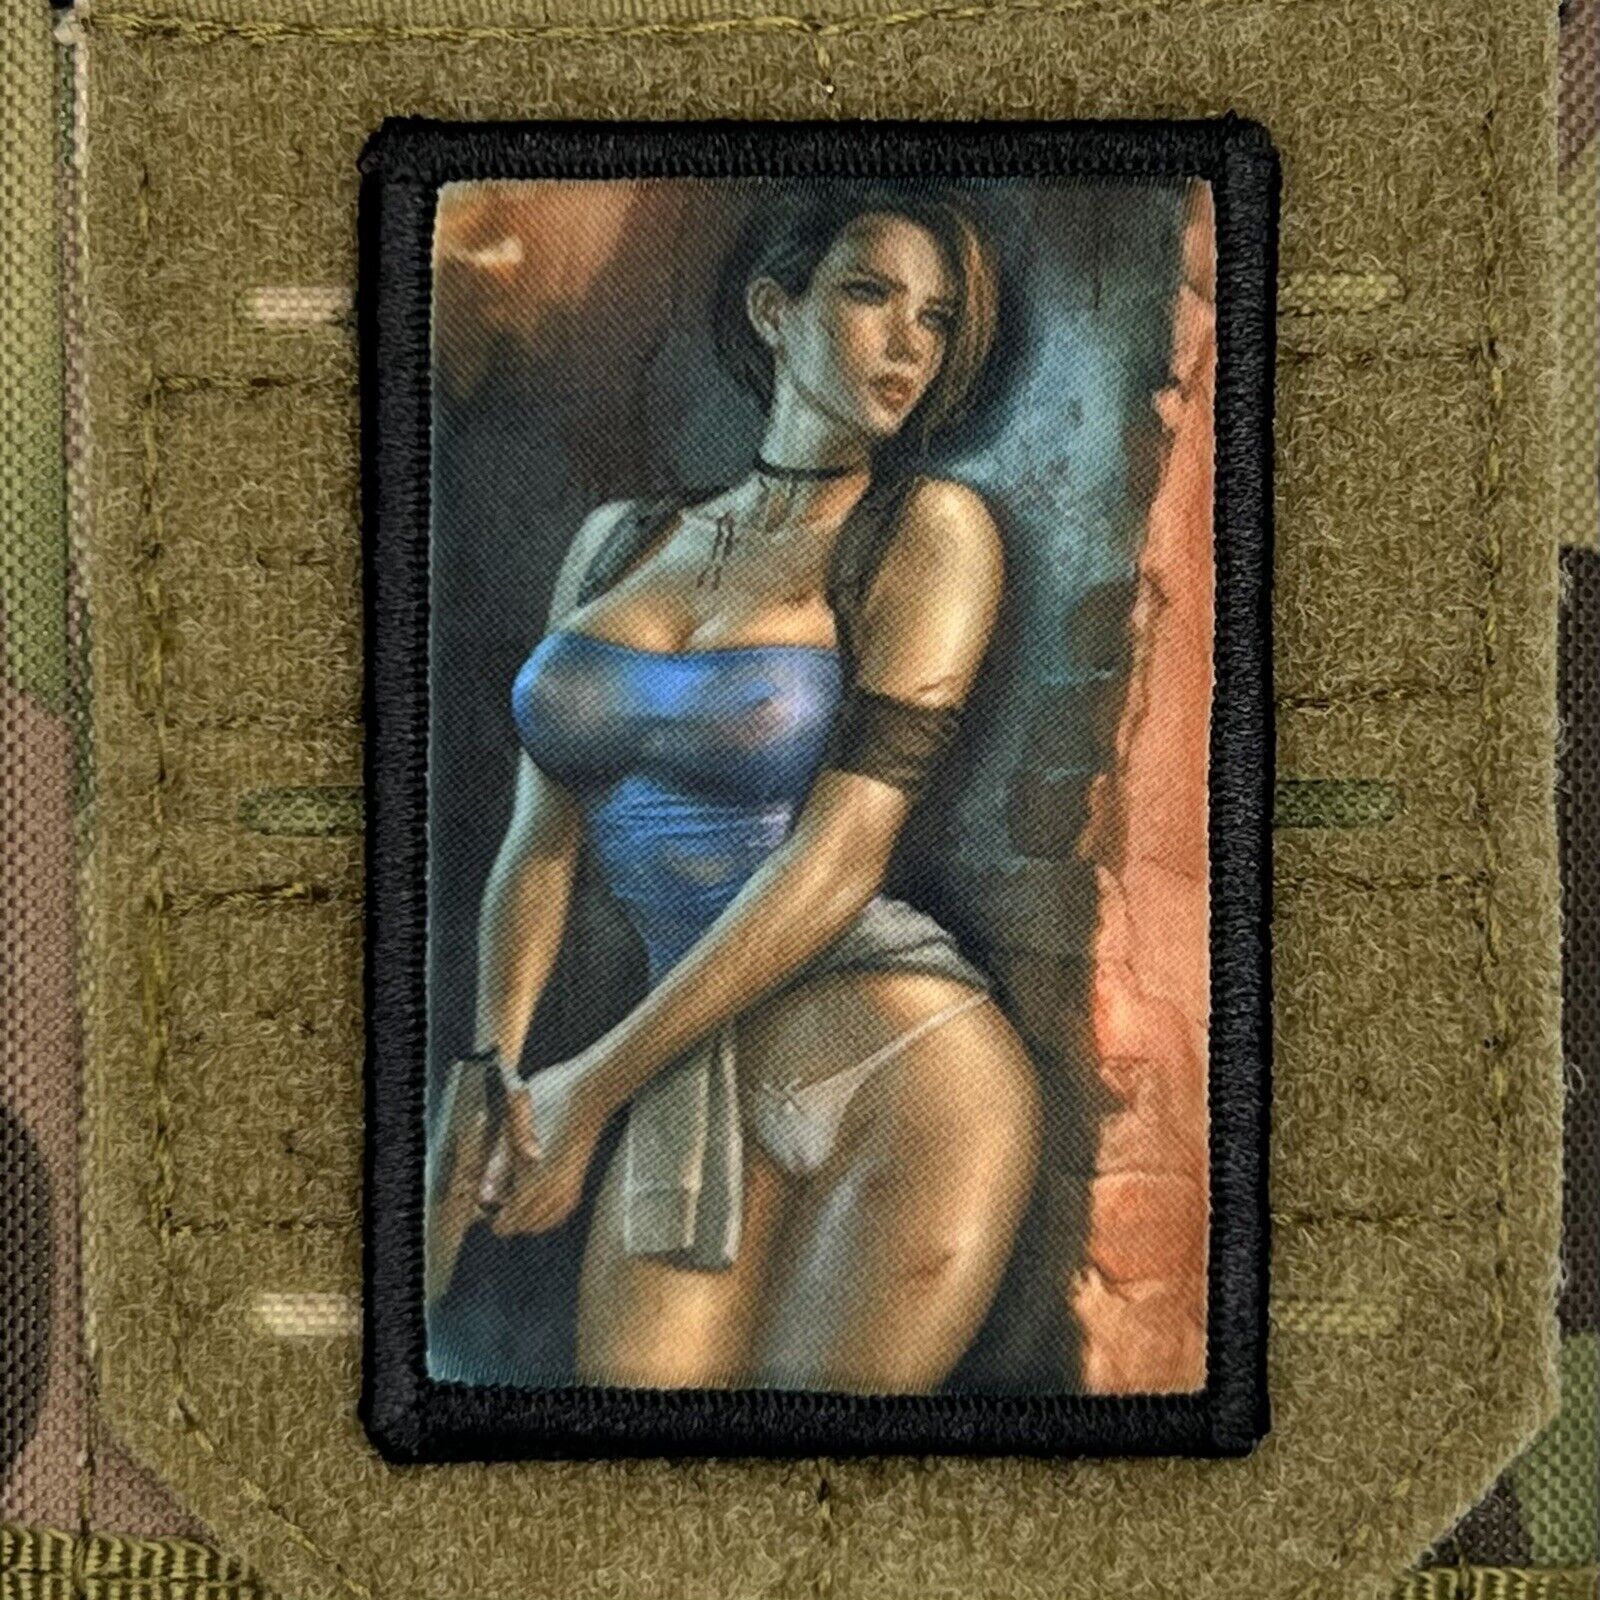 Resident Evil Jill Valentine Morale Patch / Military Badge ARMY Tactical 347